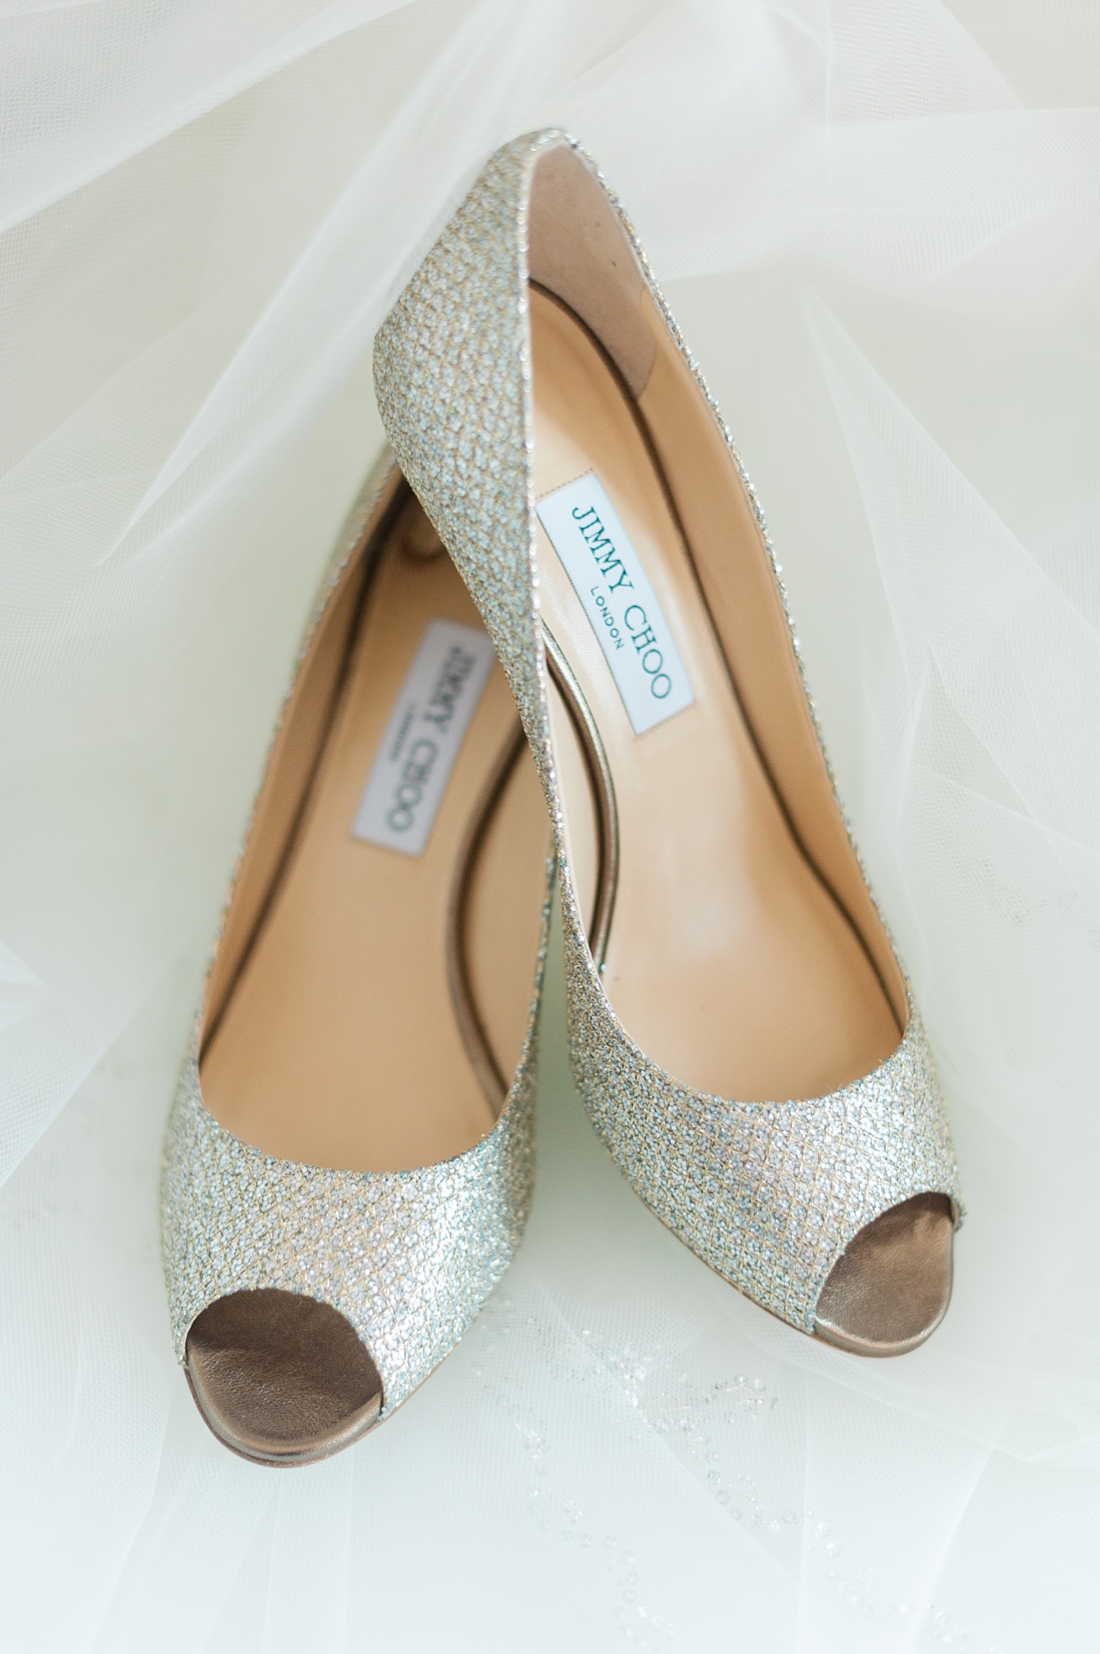 The perfect wedding shoes: Jimmy Choos from a Classic and Elegant Nautical Annapolis Yacht Club Wedding by East Coast and Maryland Fine Art Wedding Photographer, Lauren R Swann